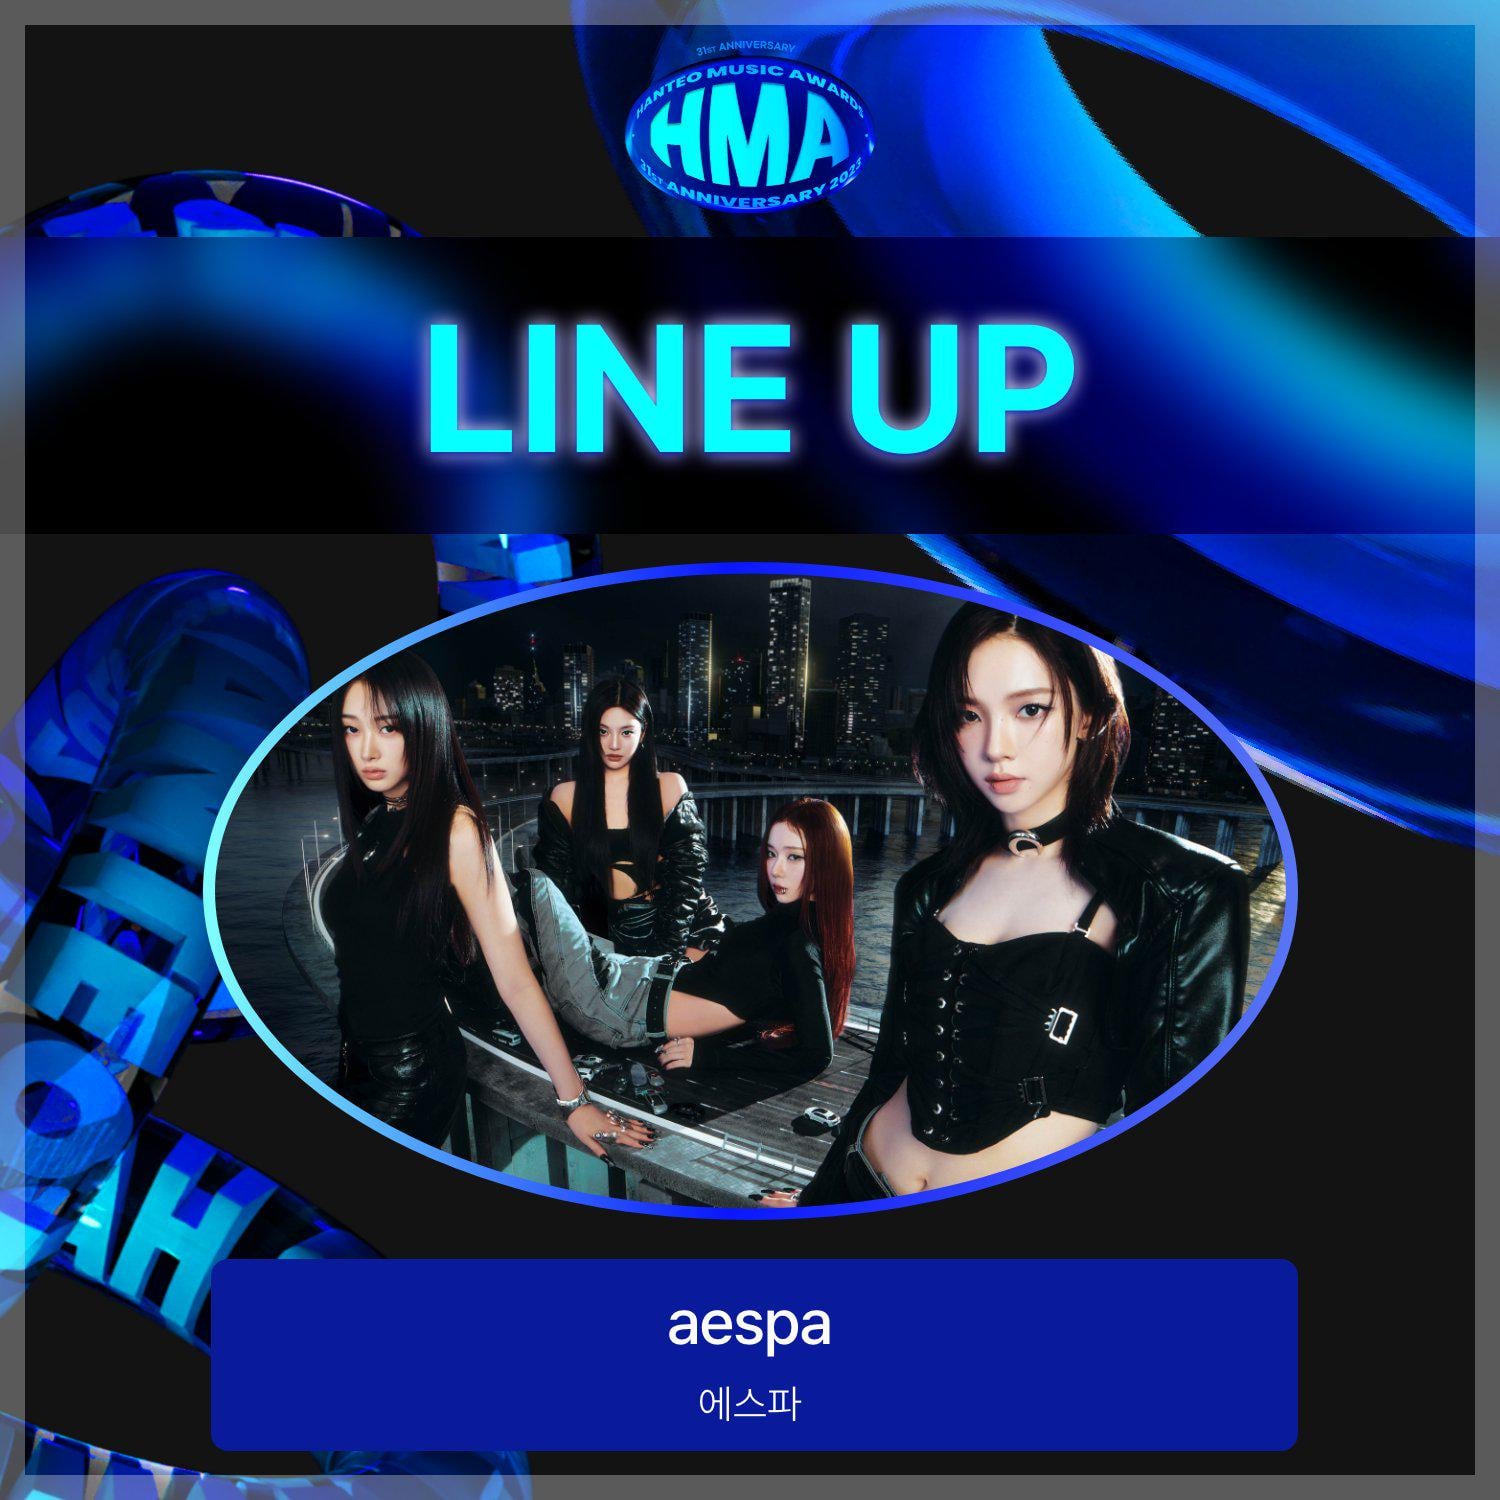 240205 aespa announced as part of the lineup for Hanteo Music Awards 2023 on February 17-18